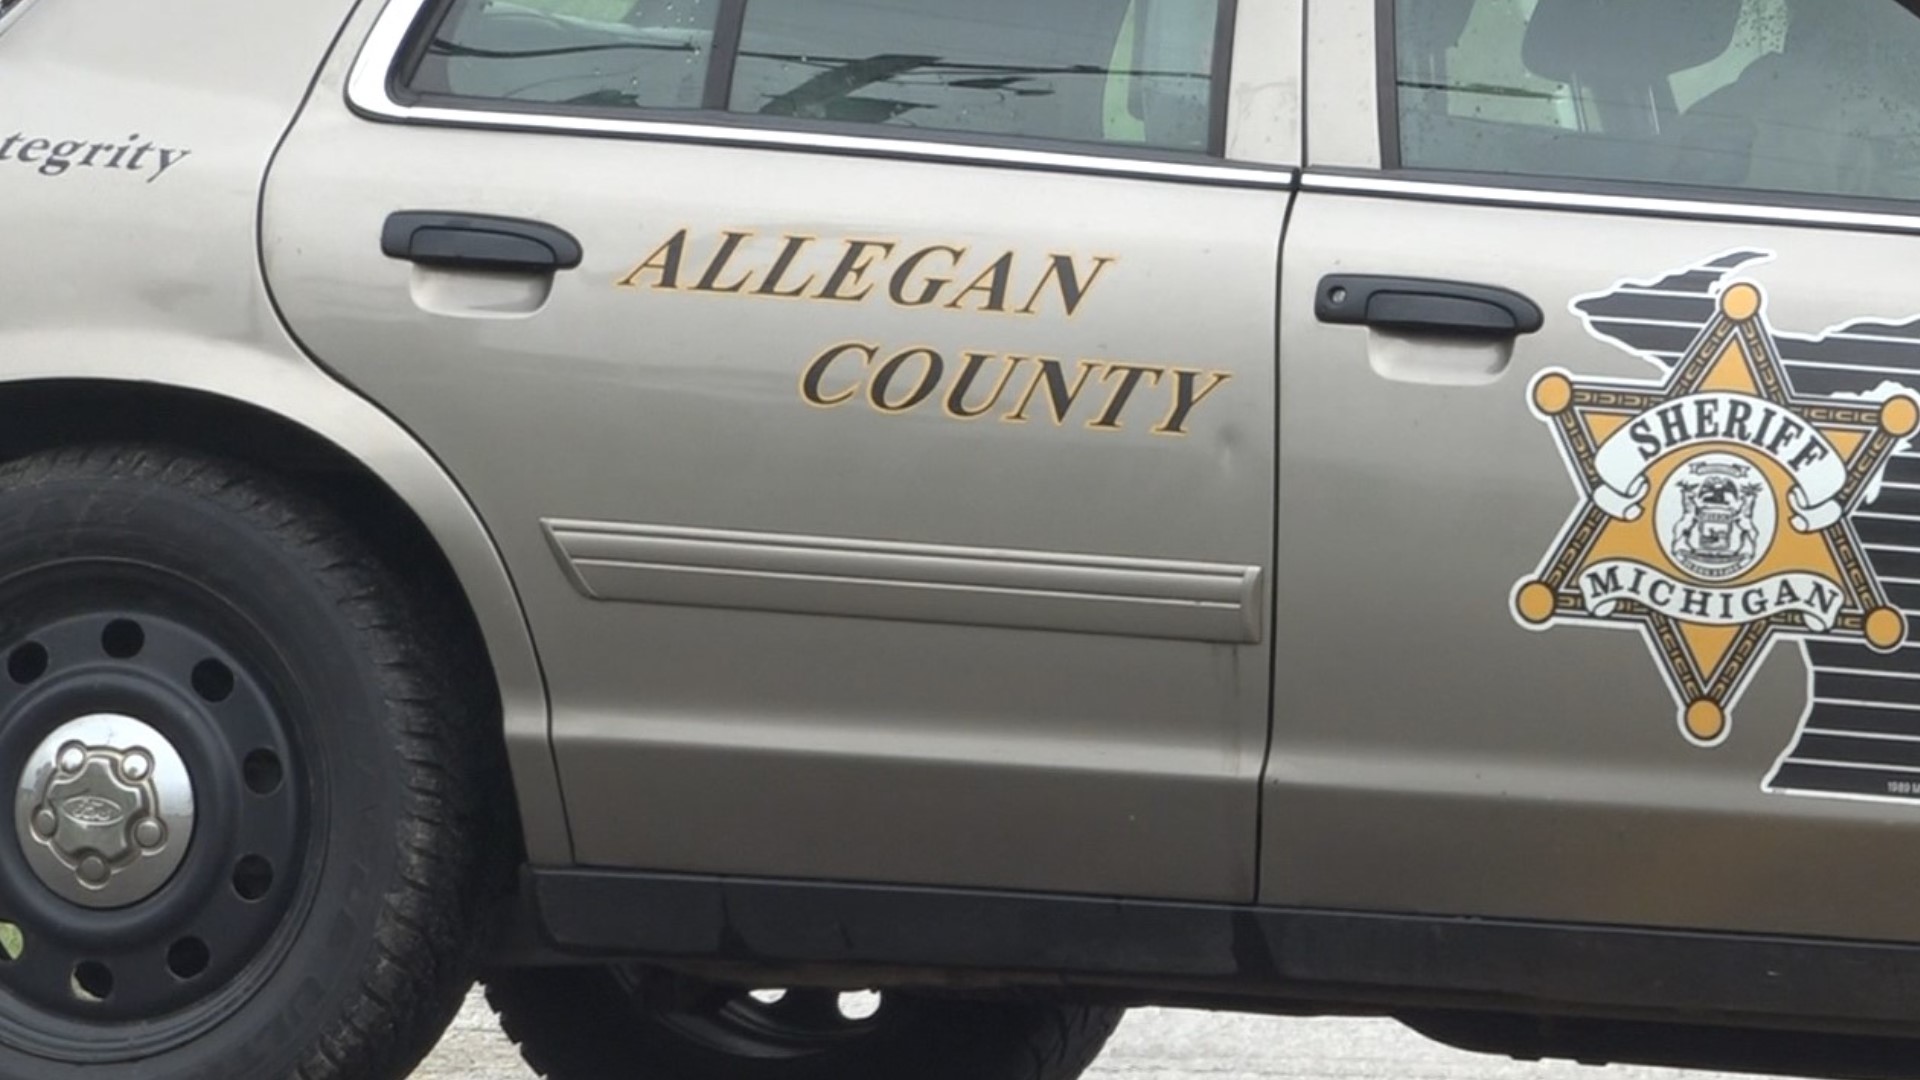 A family of four is dead after what the Allegan County Sheriff's Office is calling a murder-suicide in Lee Township Saturday afternoon.